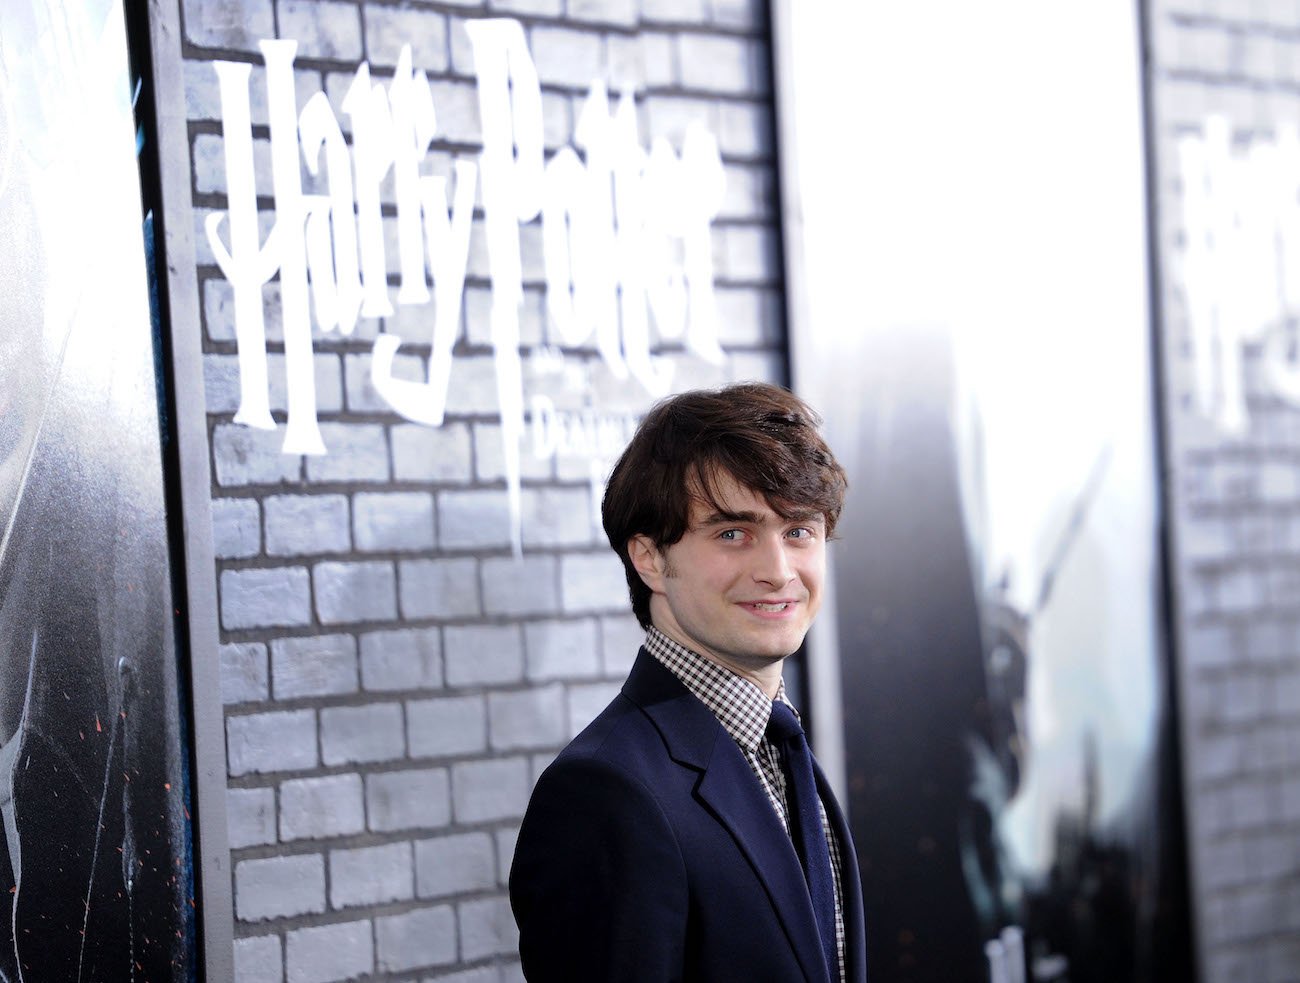 Daniel Radcliffe Once Said His Favorite ‘Harry Potter’ Joke Is ‘Not Very PC’